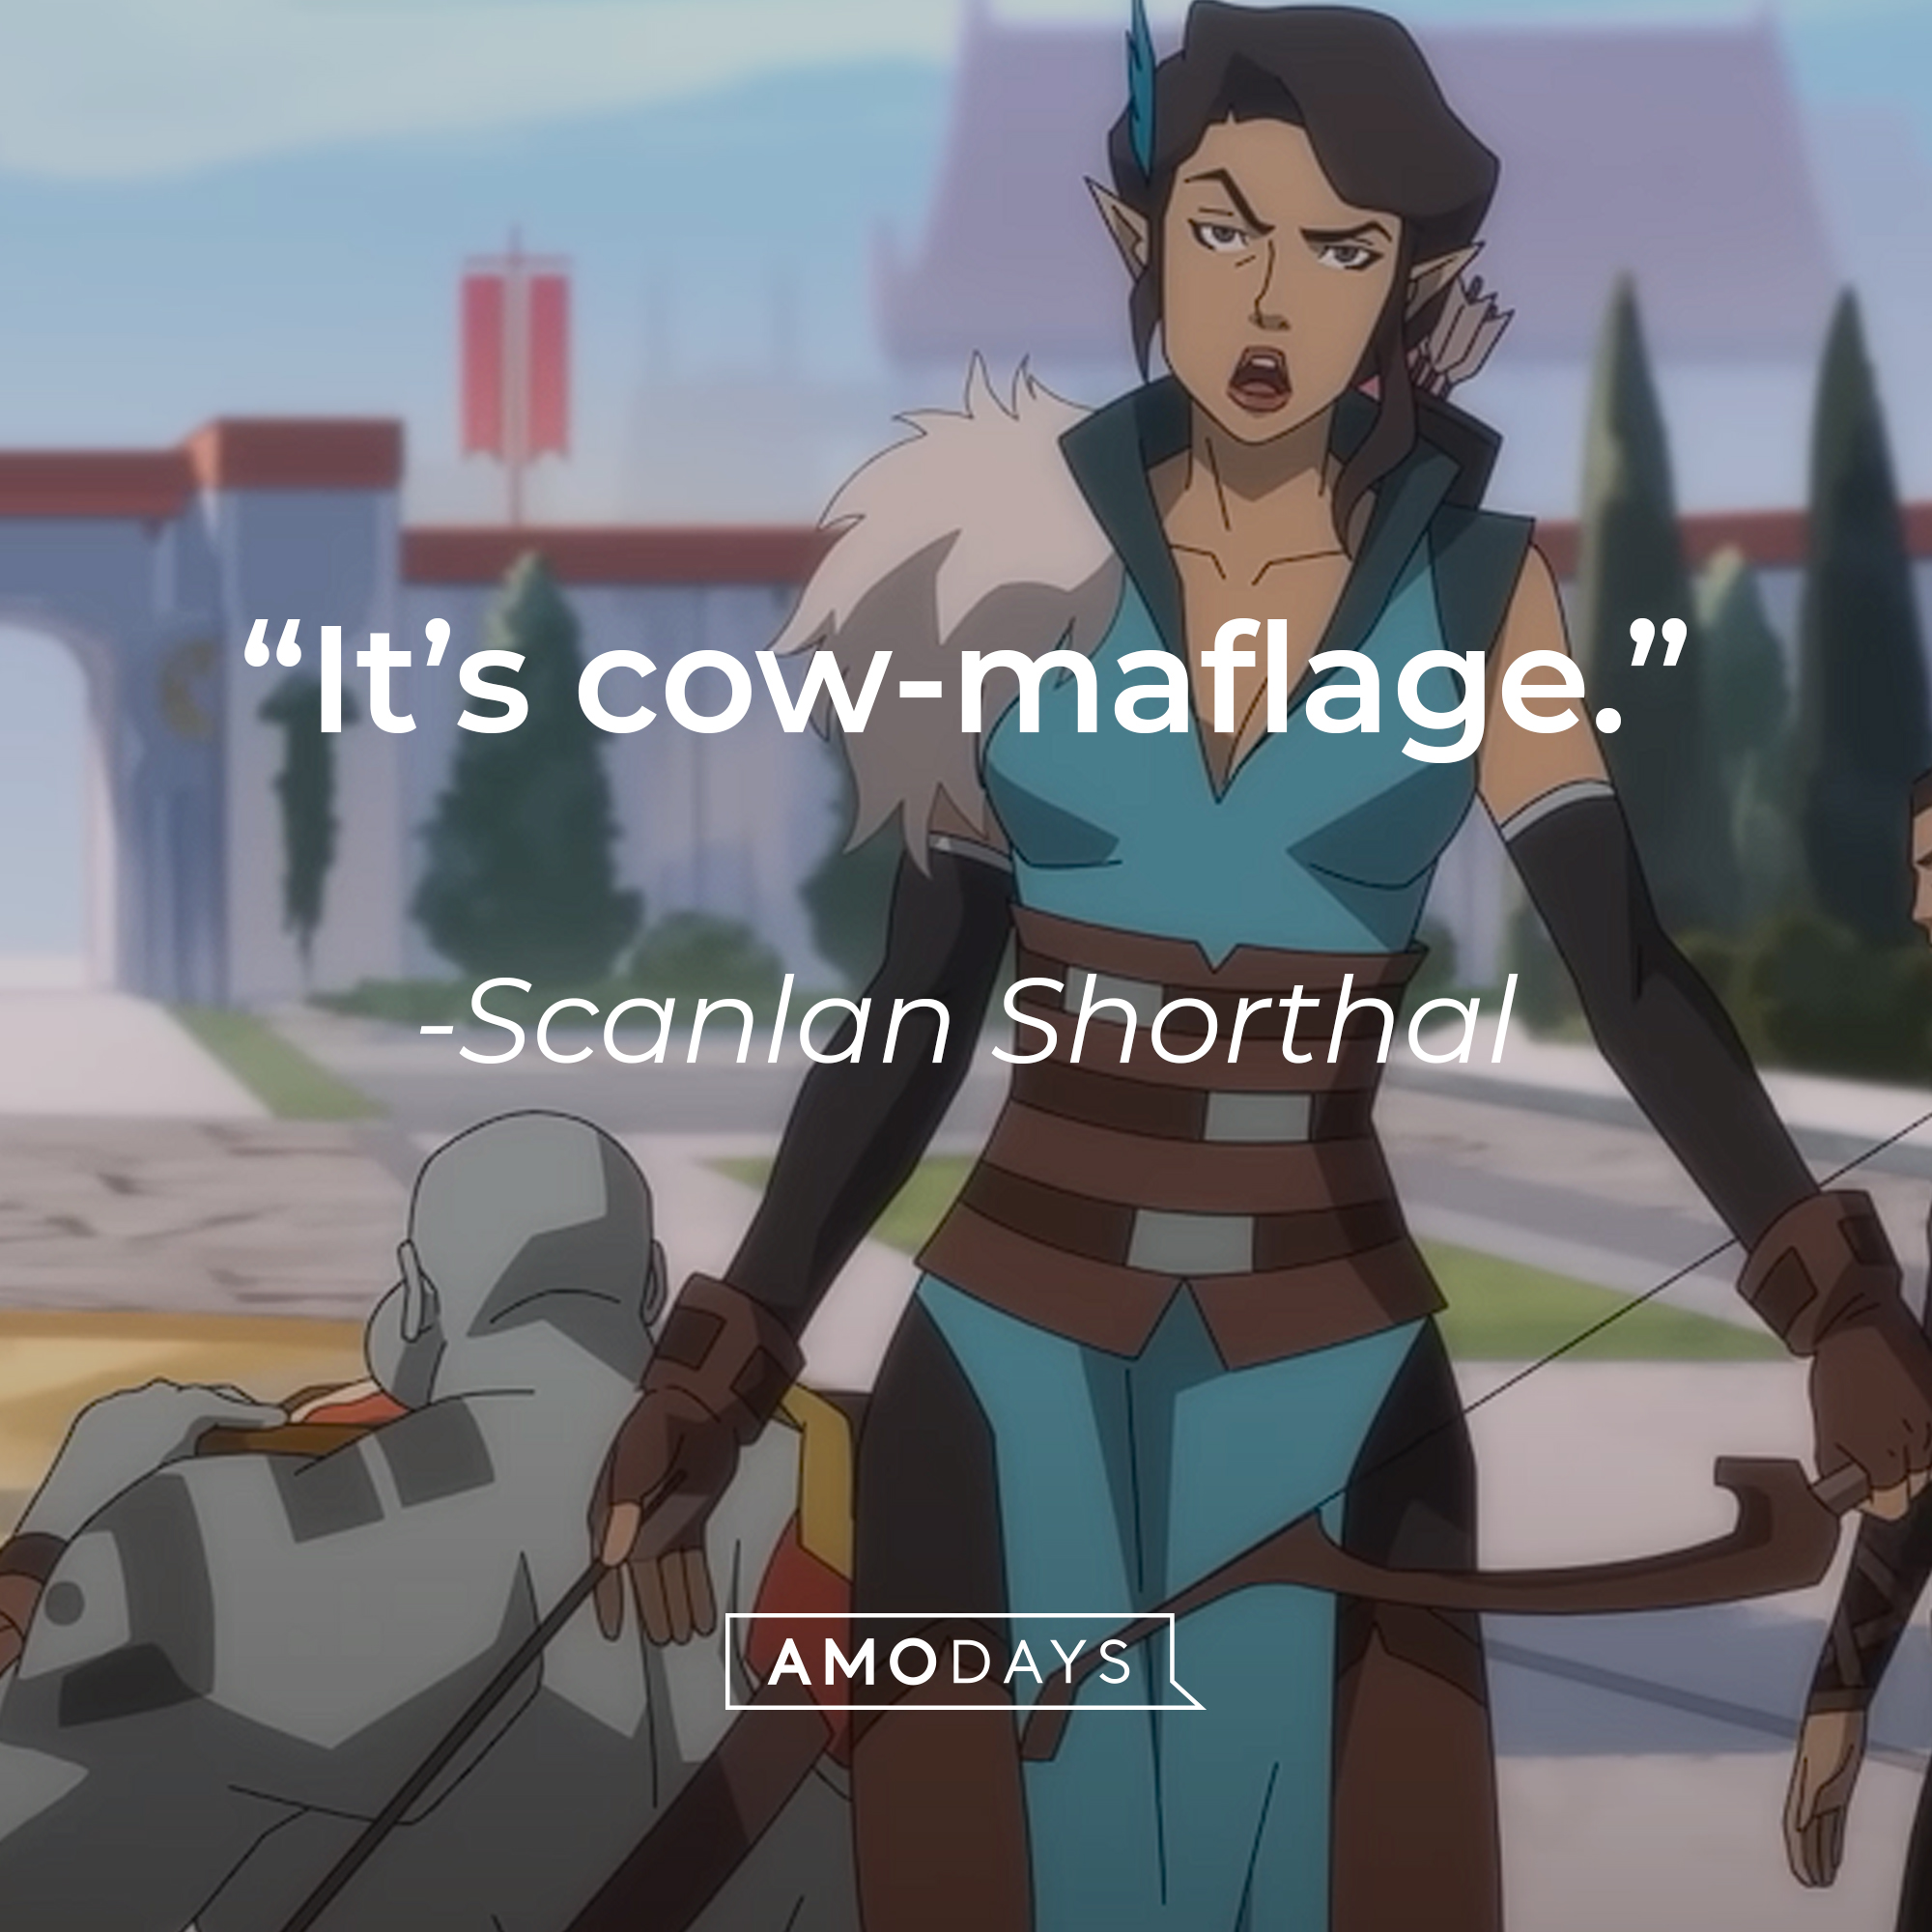 An image of Scanlan Shorthalt with her quote:  “It’s cow-maflage.” | Source: youtube.com/PrimeVideo